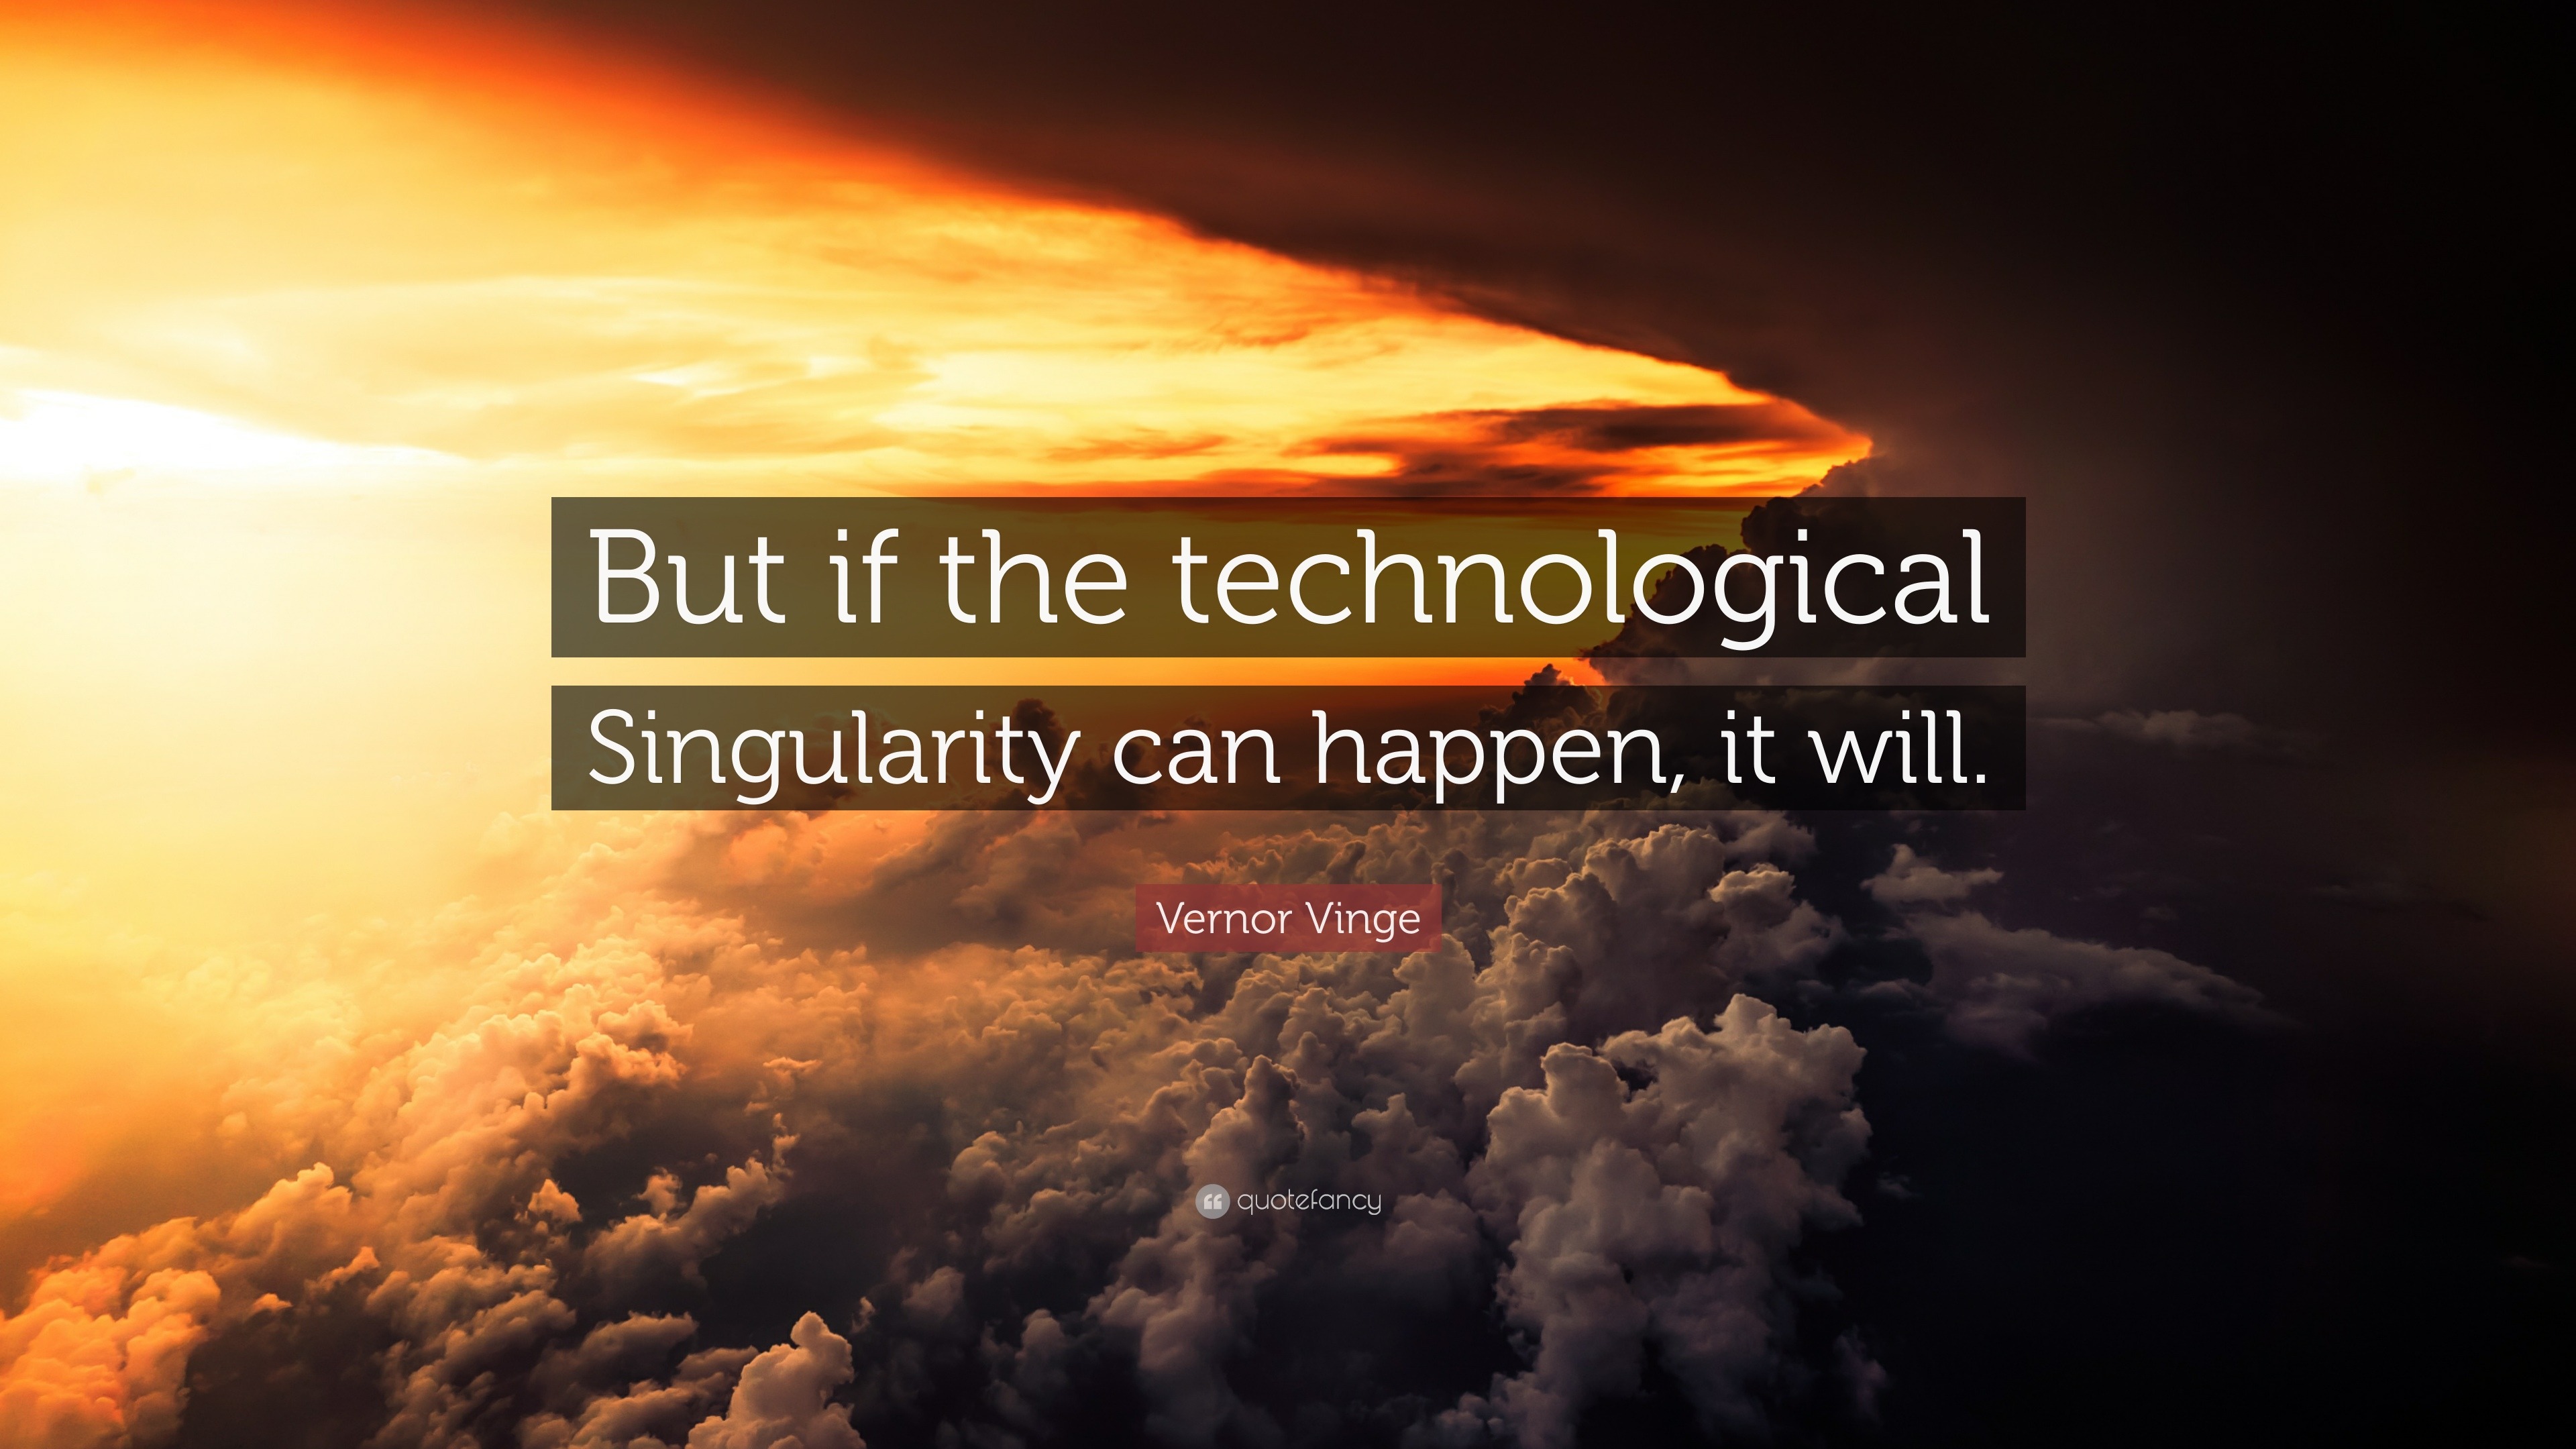 https://quotefancy.com/media/wallpaper/3840x2160/1866288-Vernor-Vinge-Quote-But-if-the-technological-Singularity-can-happen.jpg